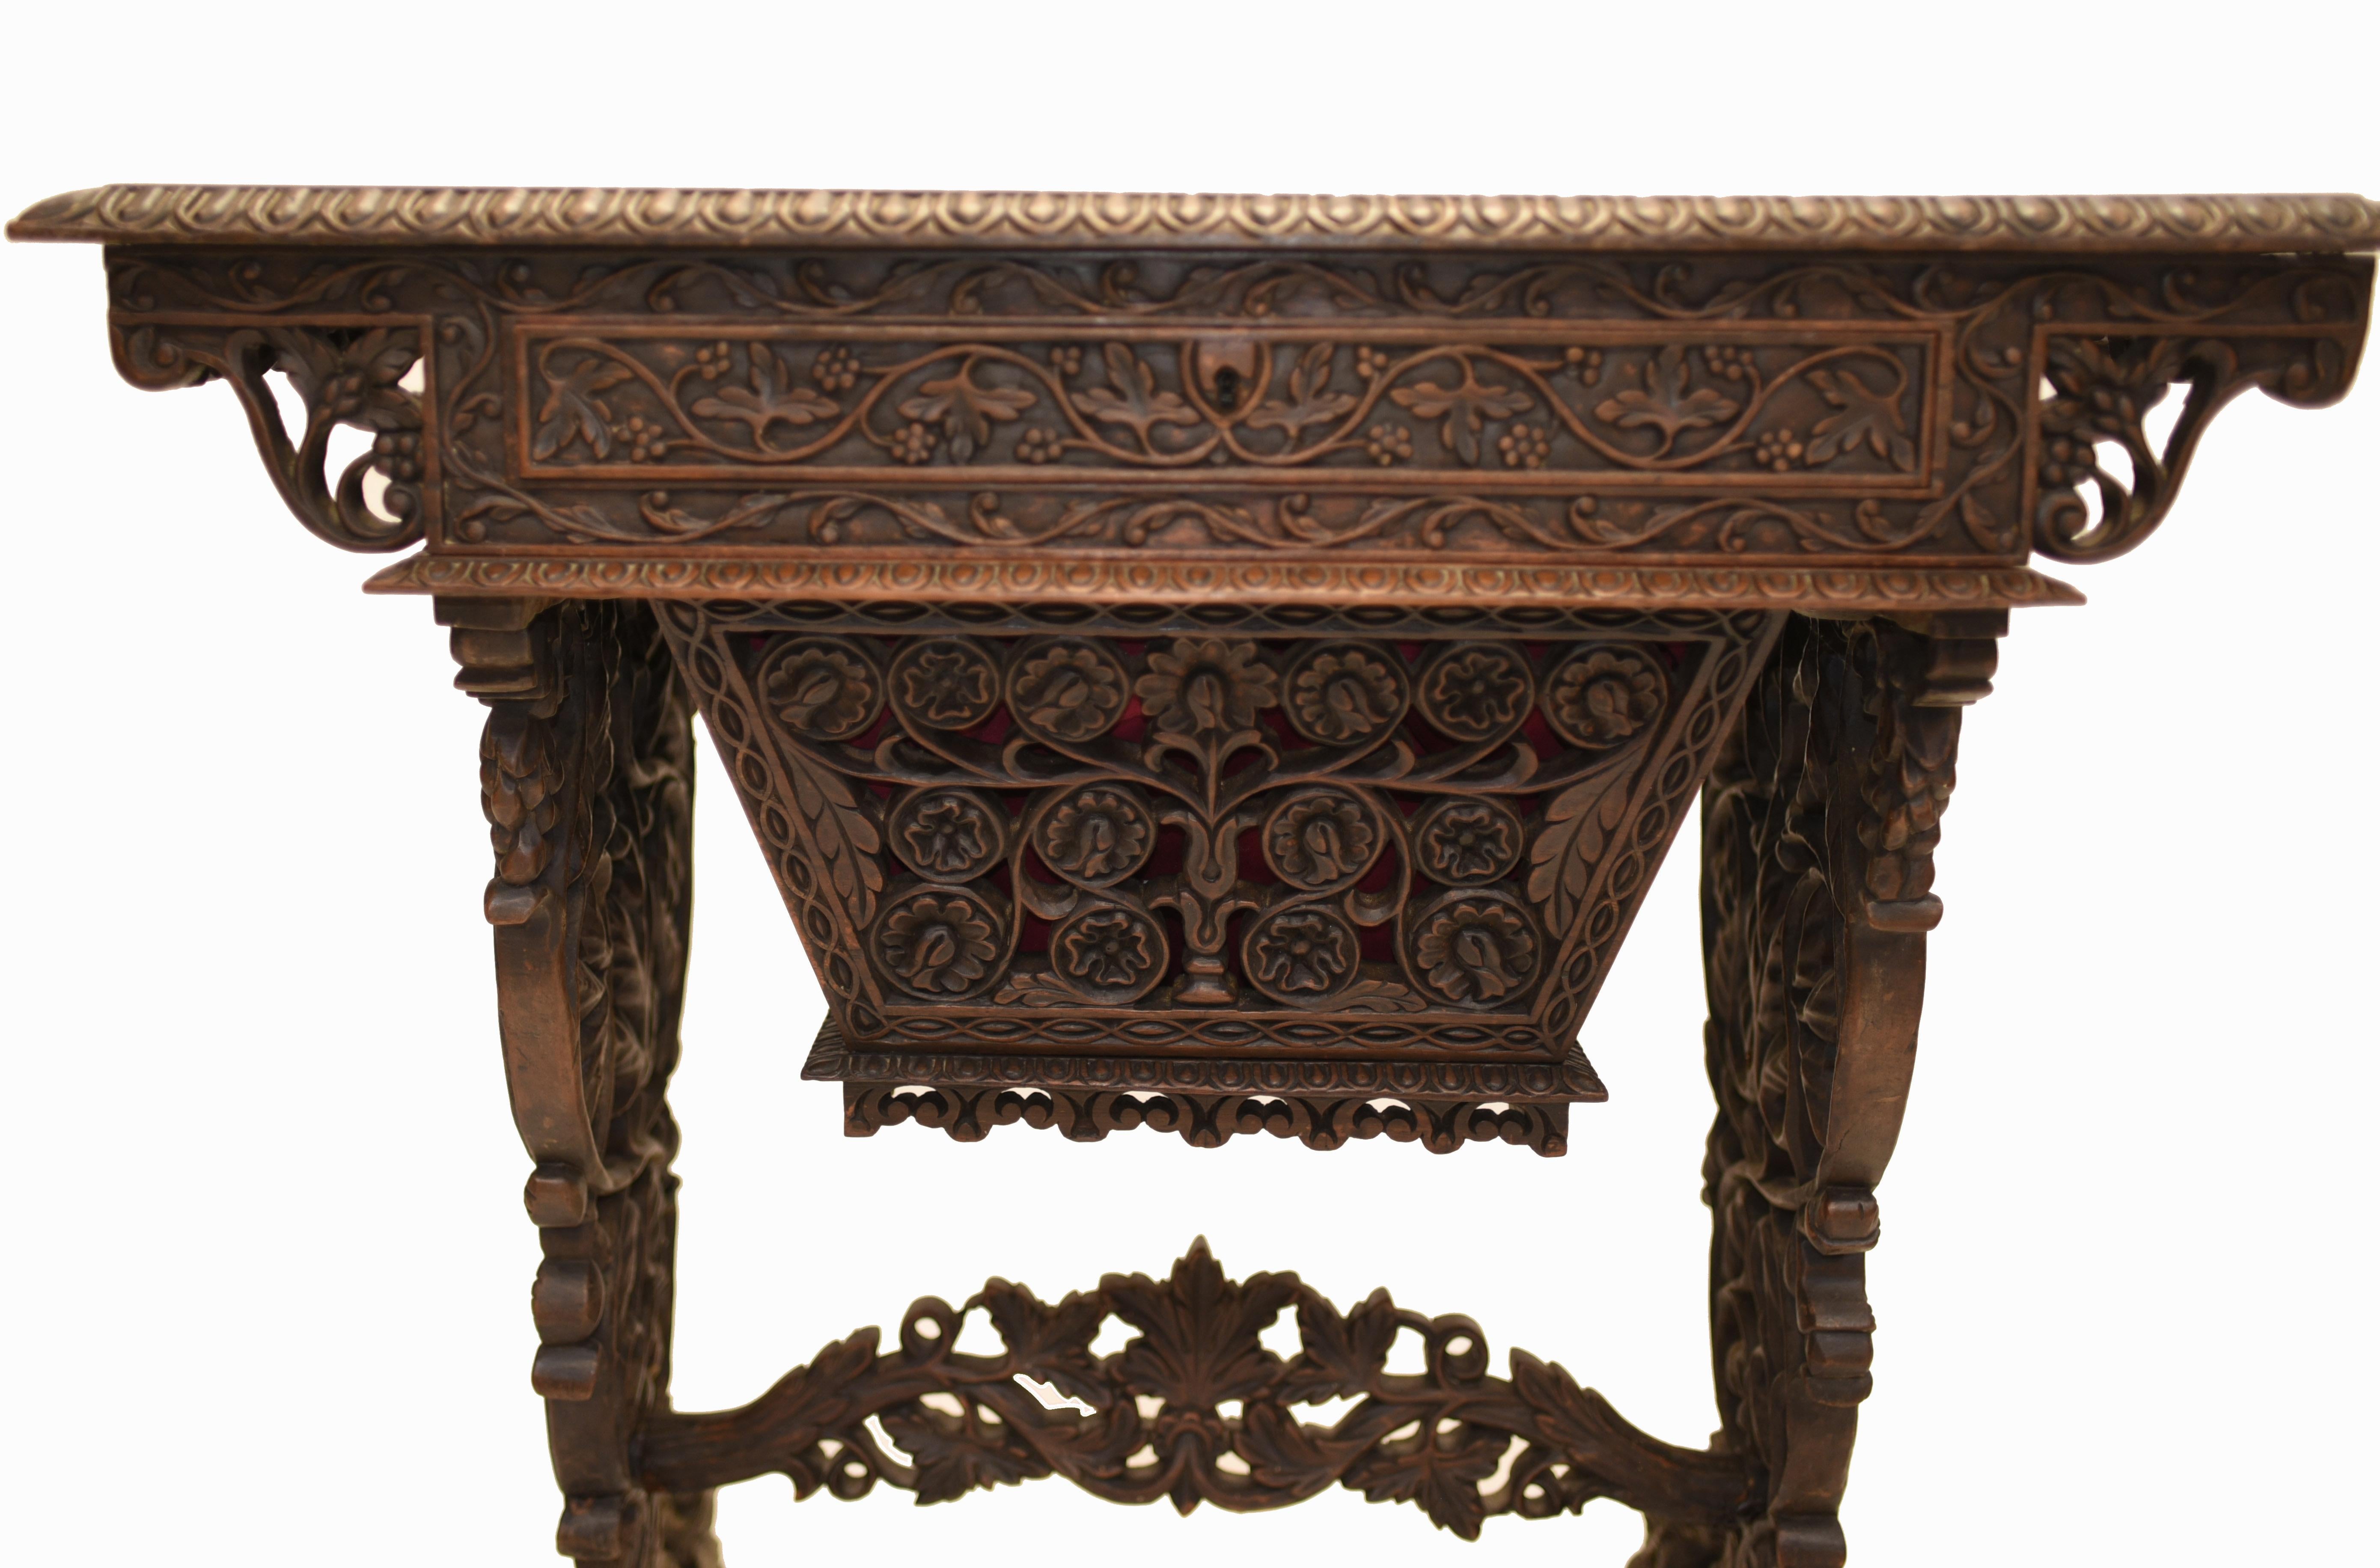 - Amazing hand carved antique Burmese writing table or desk
- Hopefully the photos illustrate the amazingly detailed hand carved features
- Typical of Burmese furniture, carved from hardwood
- Large drawer opens out below to reveal lots of